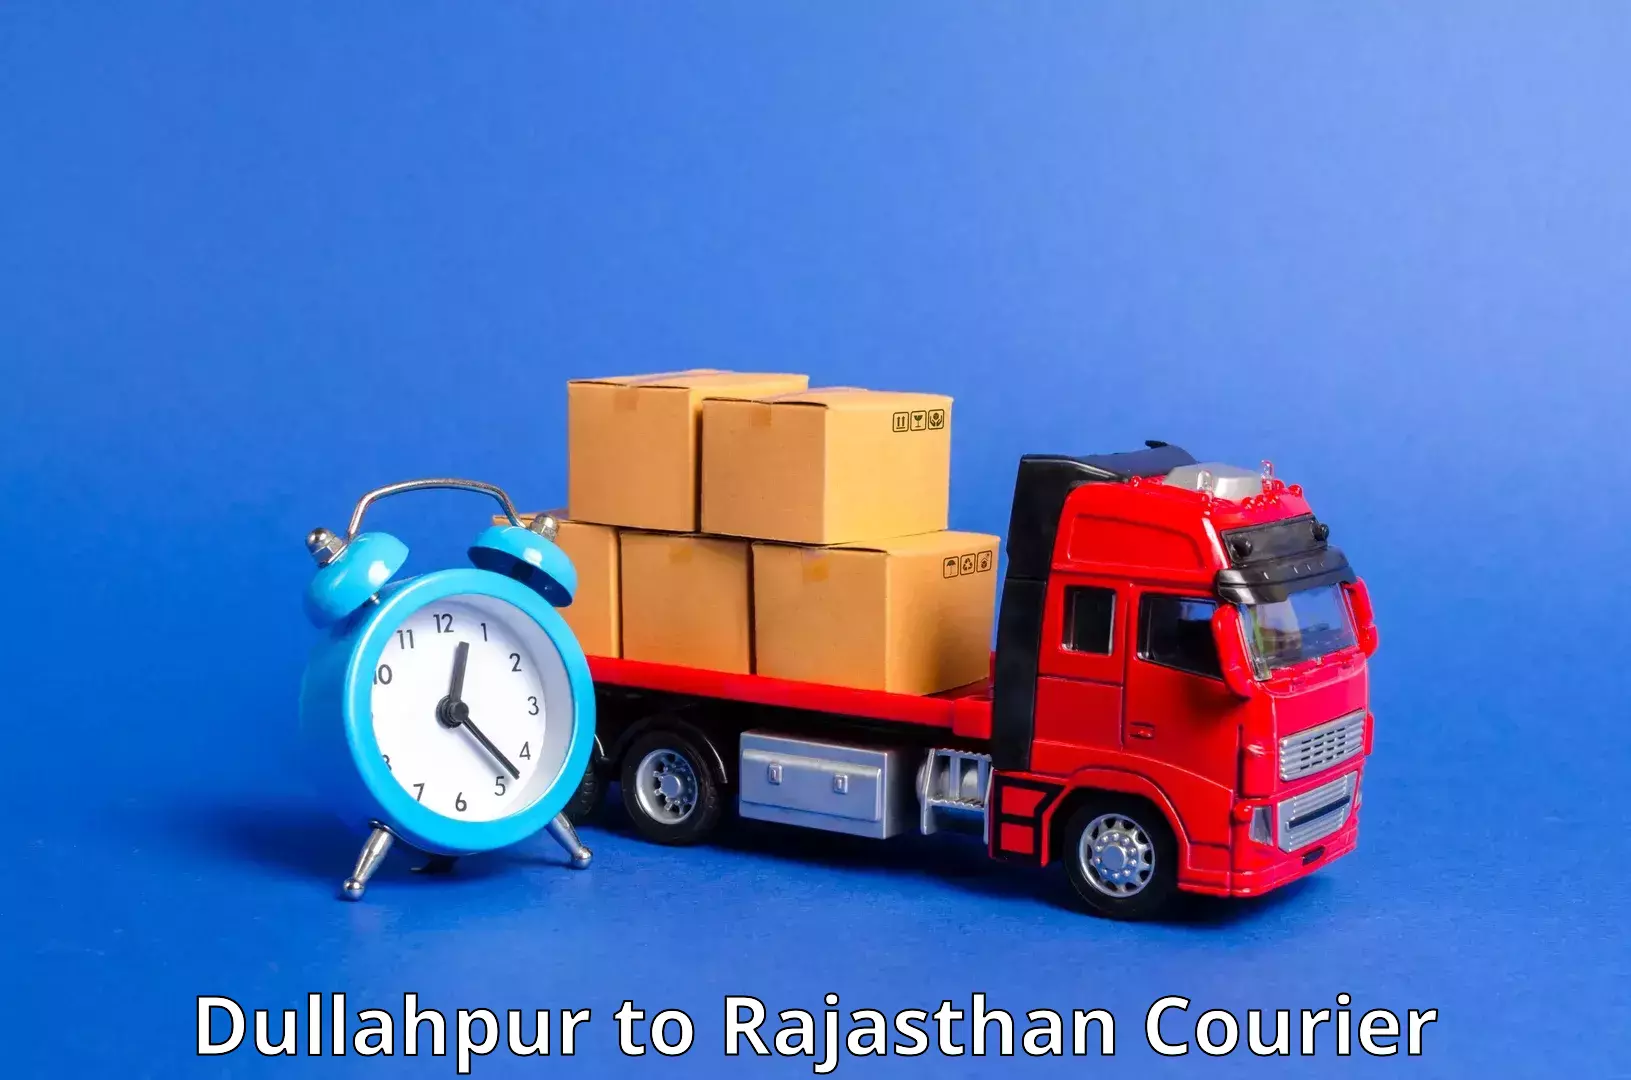 Tech-enabled shipping Dullahpur to Udaipur